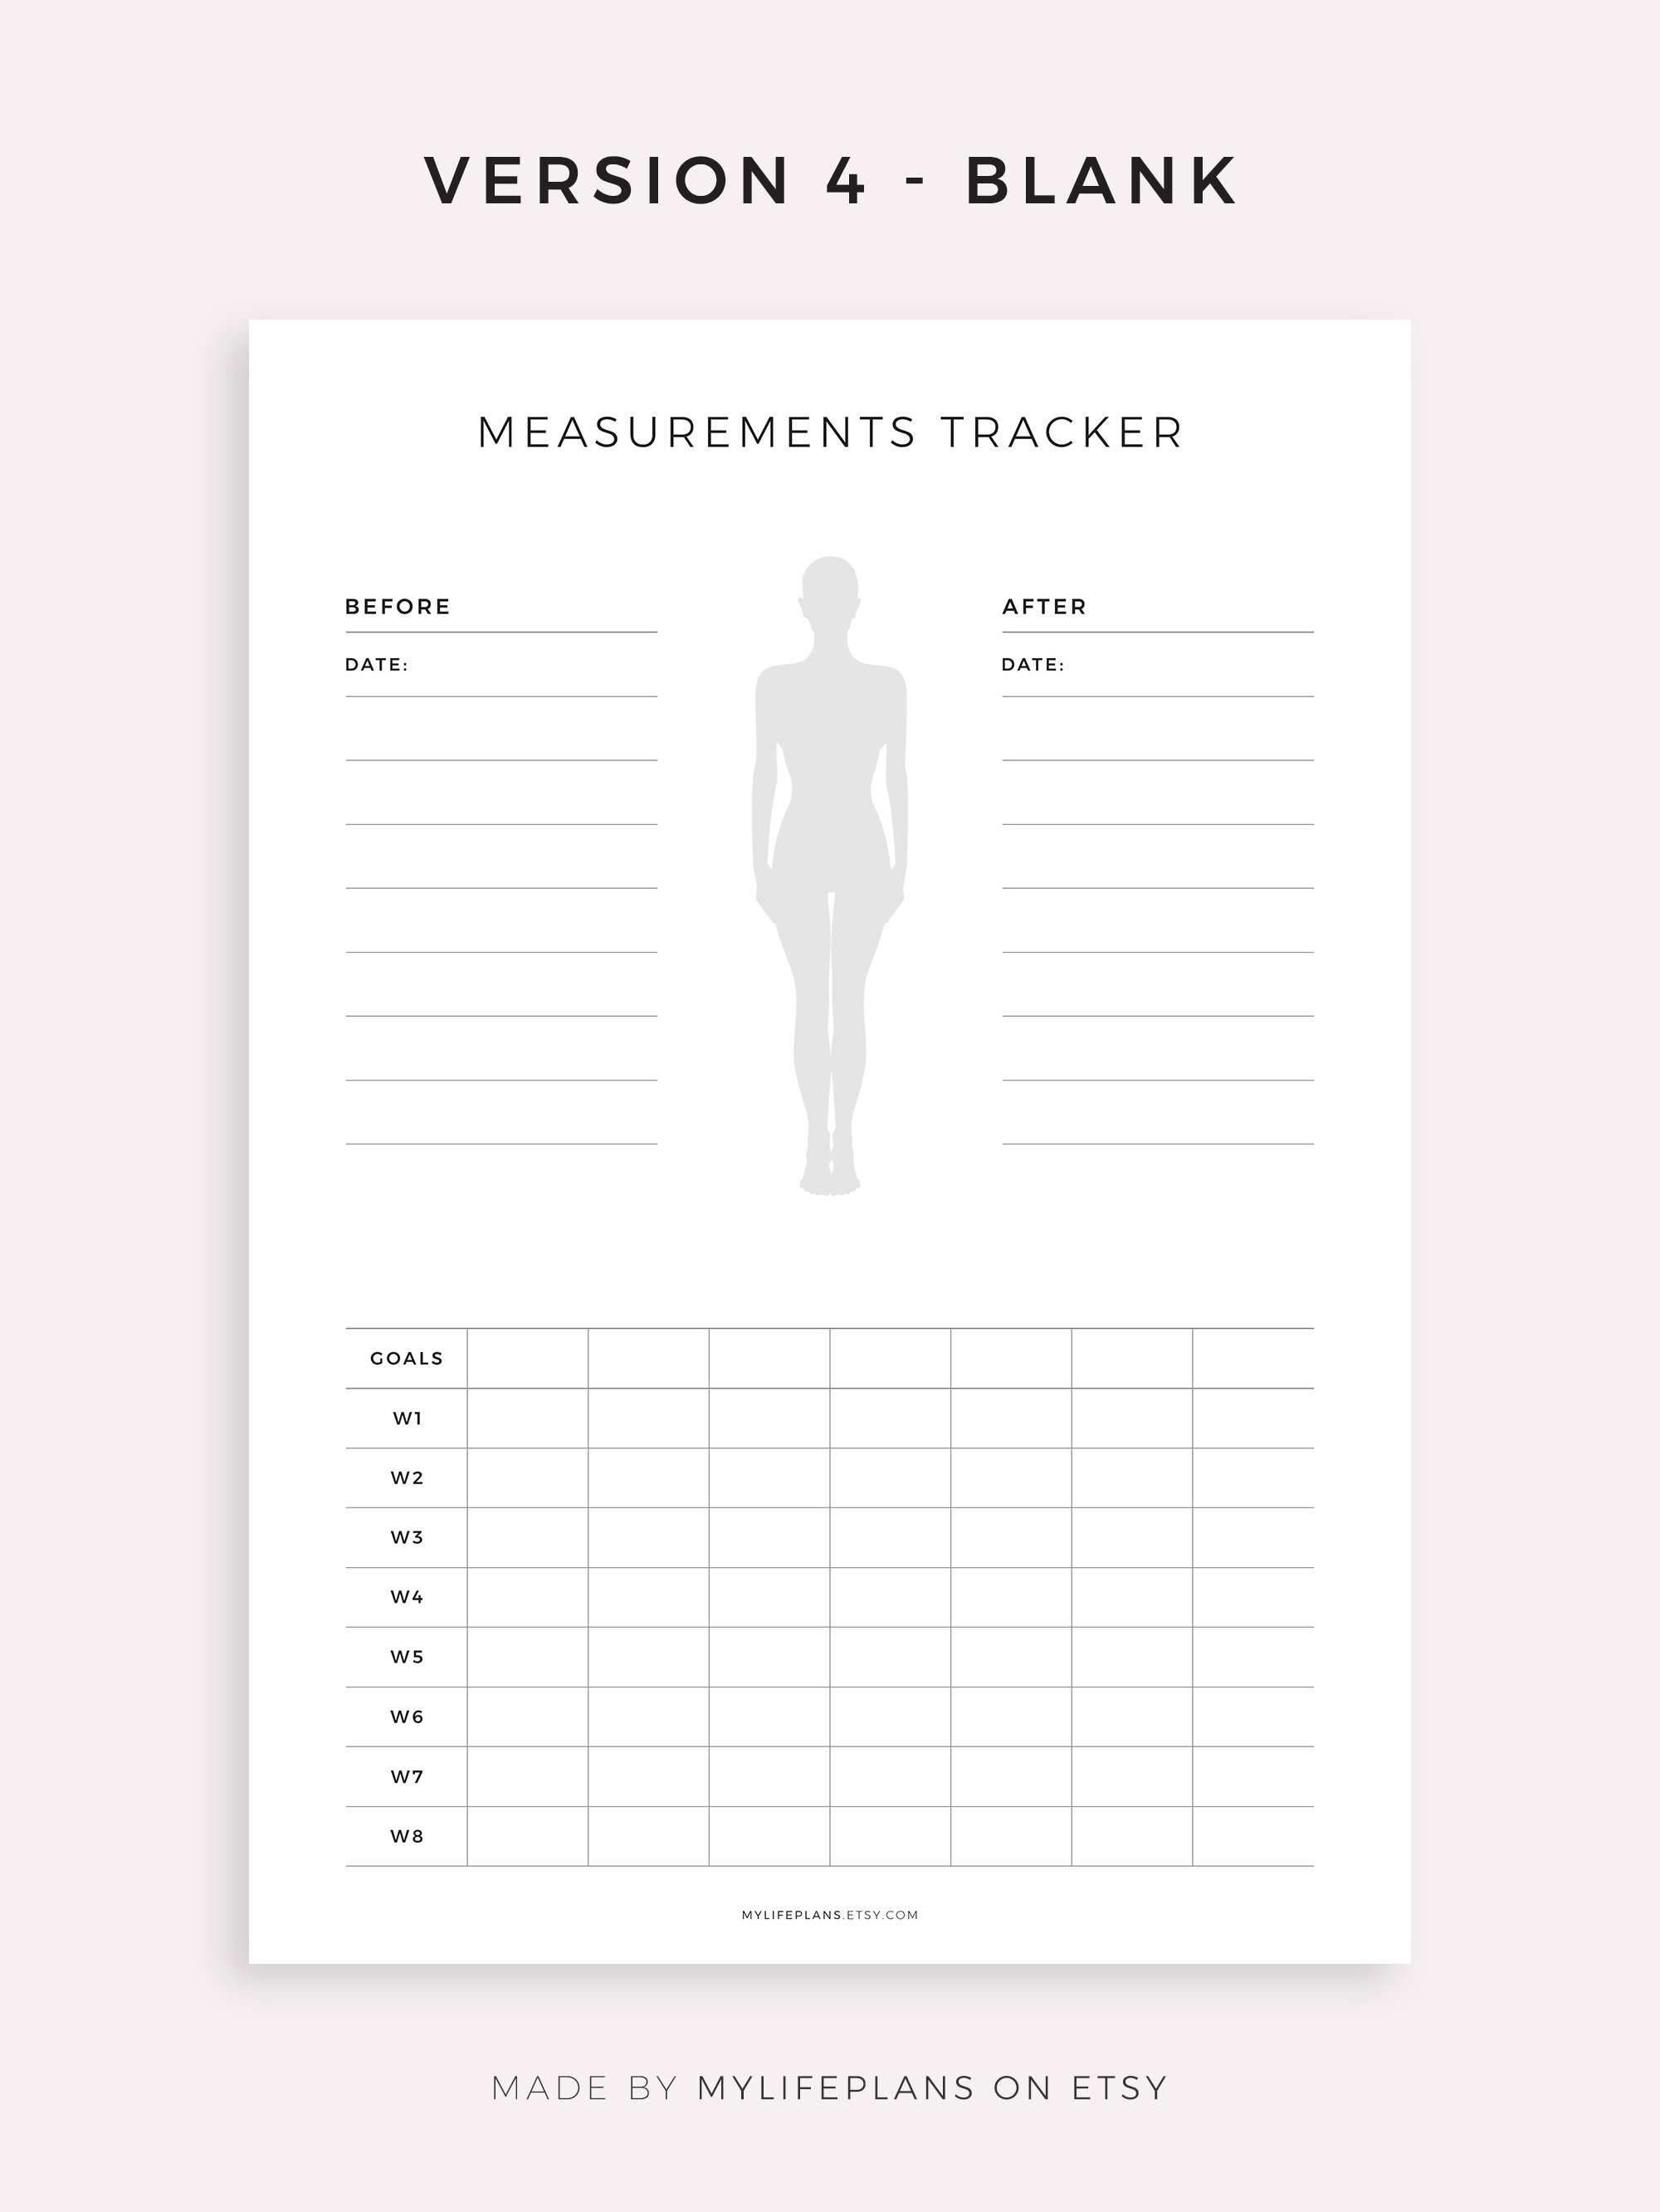 Start accurately tracking body measurements to highlight your progress